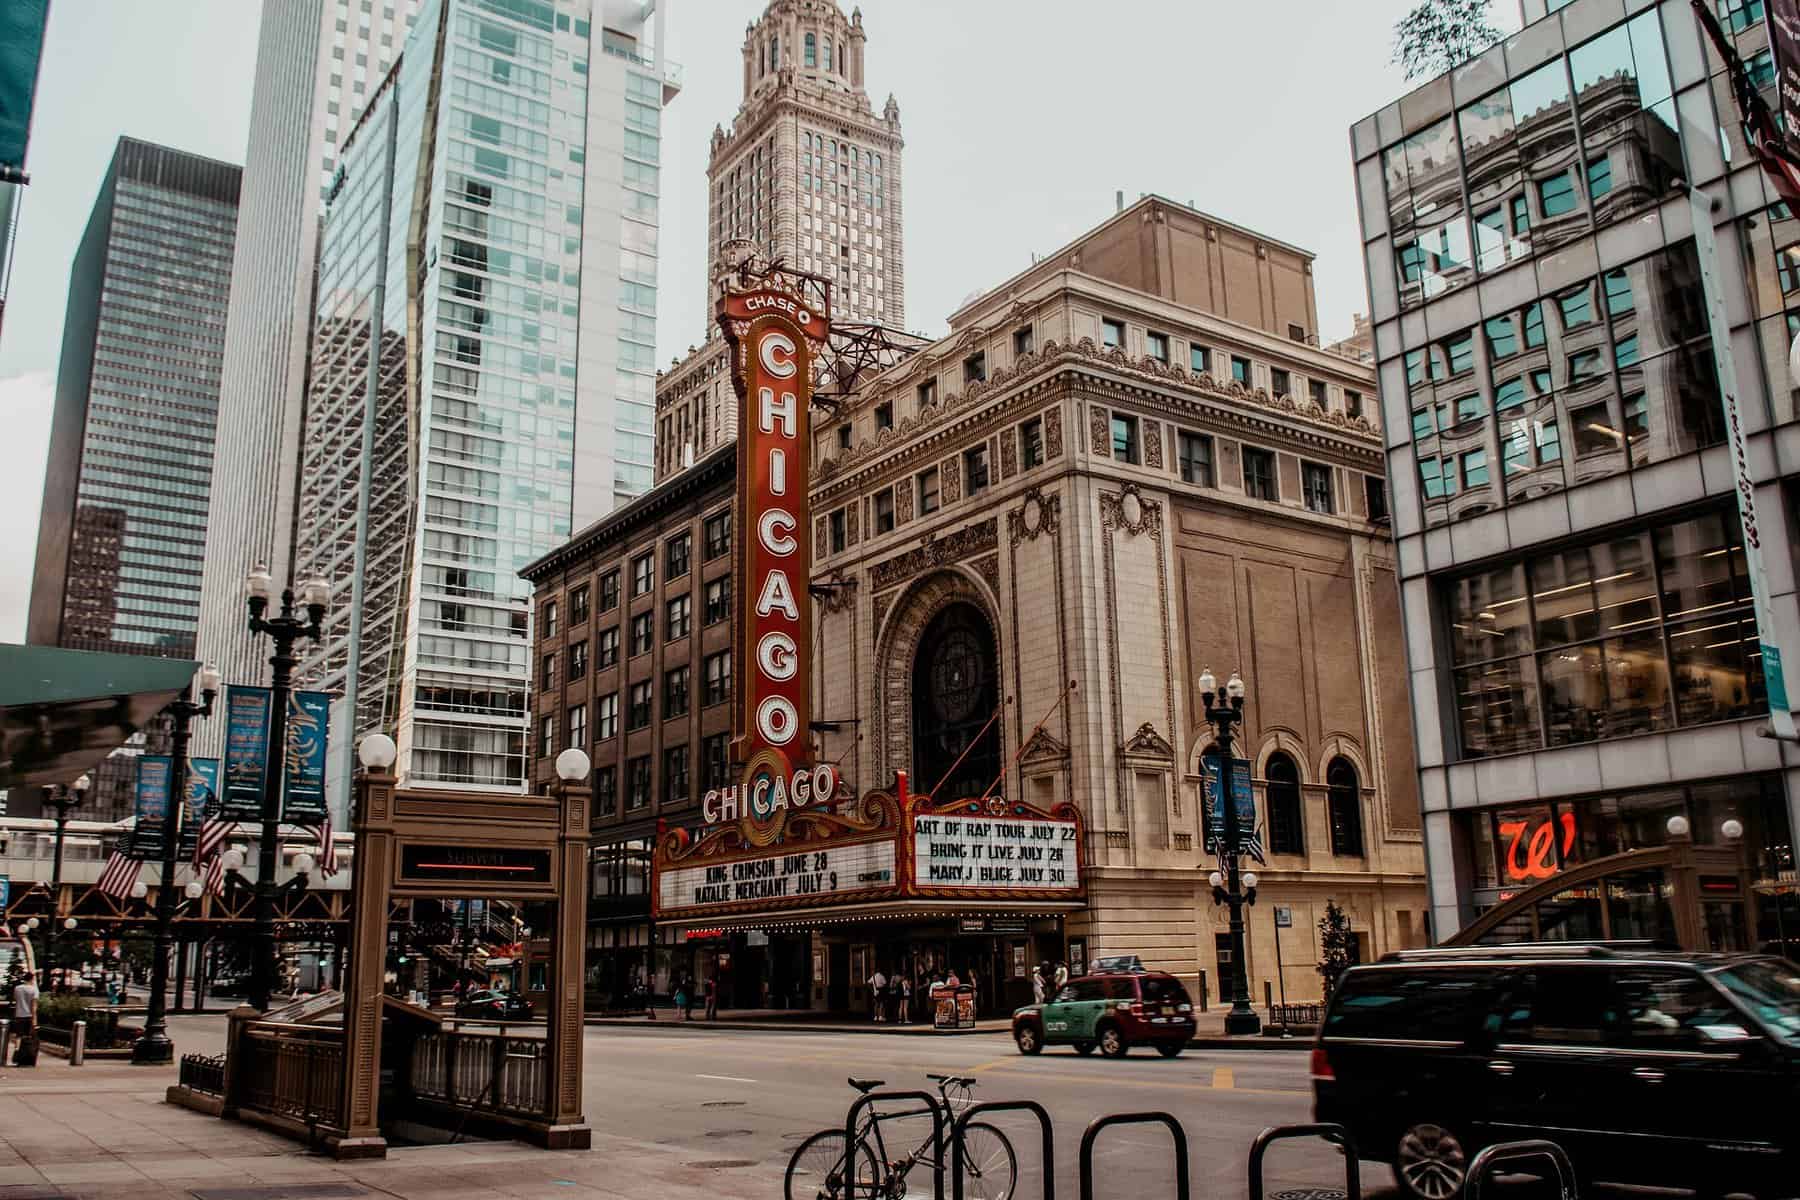 The front of a Chicago theatre is shown from street level.